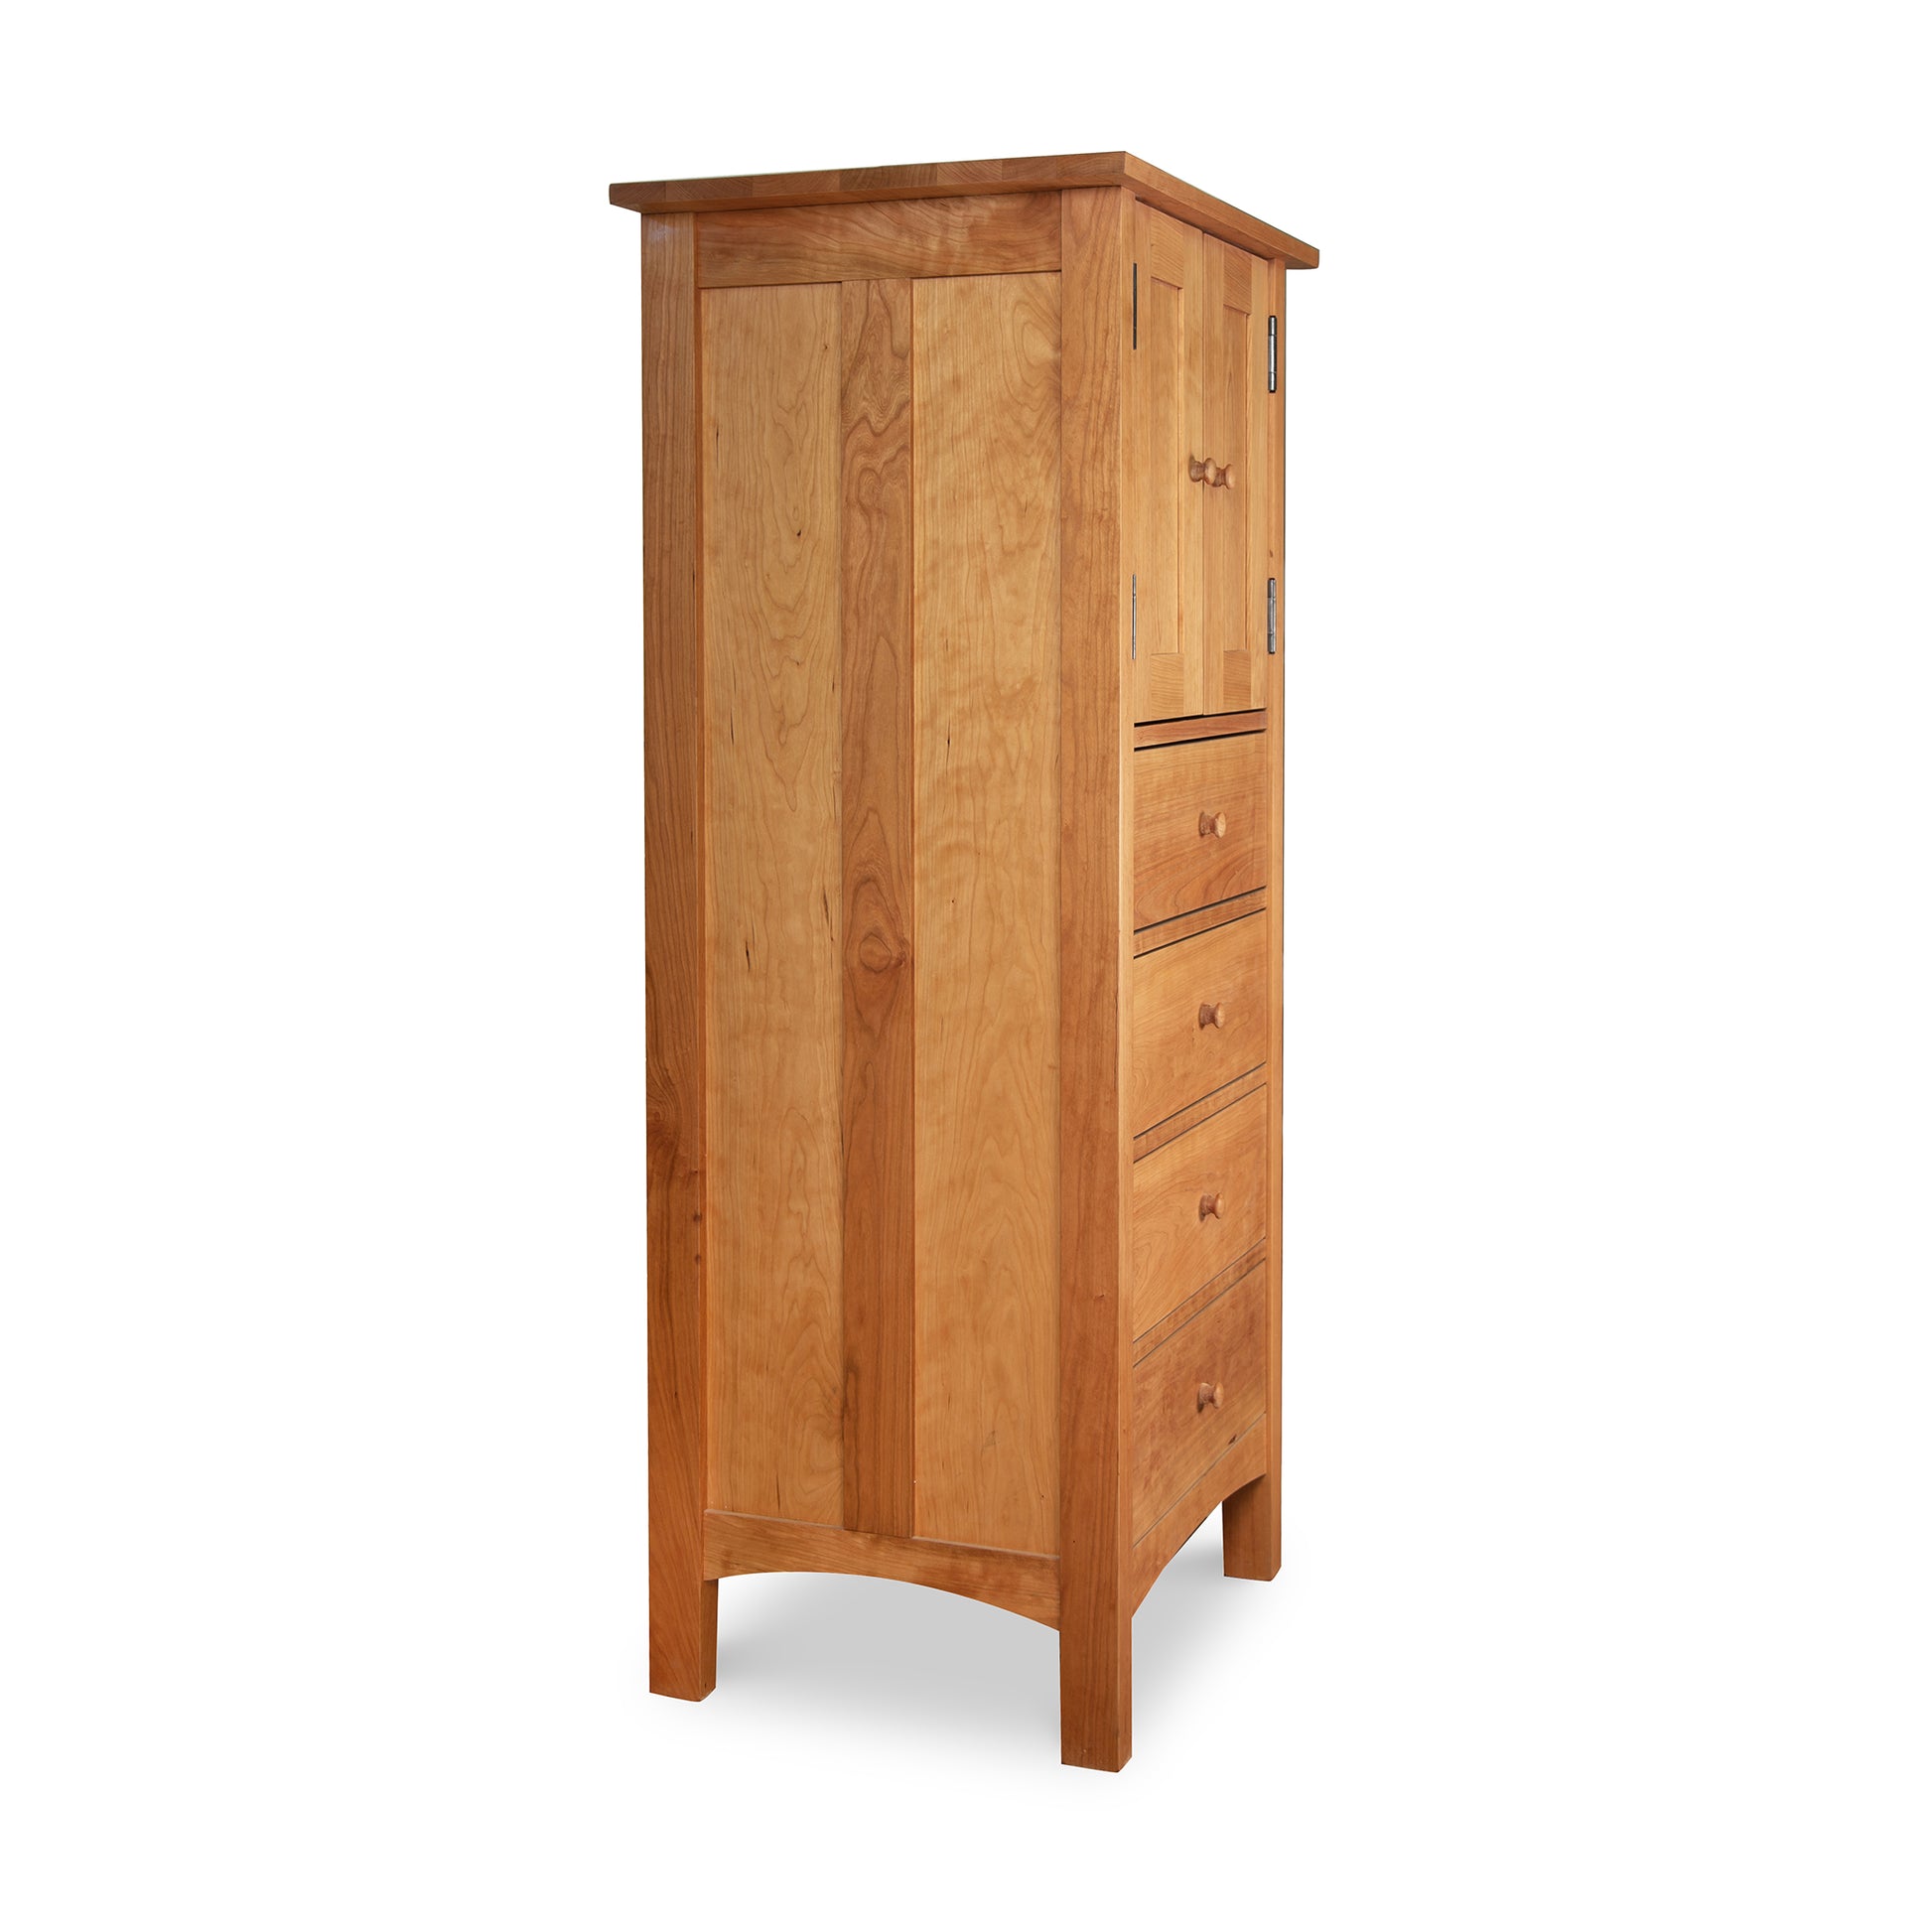 A tall Burlington Shaker-style wooden cabinet with two drawers from Vermont Furniture Designs.